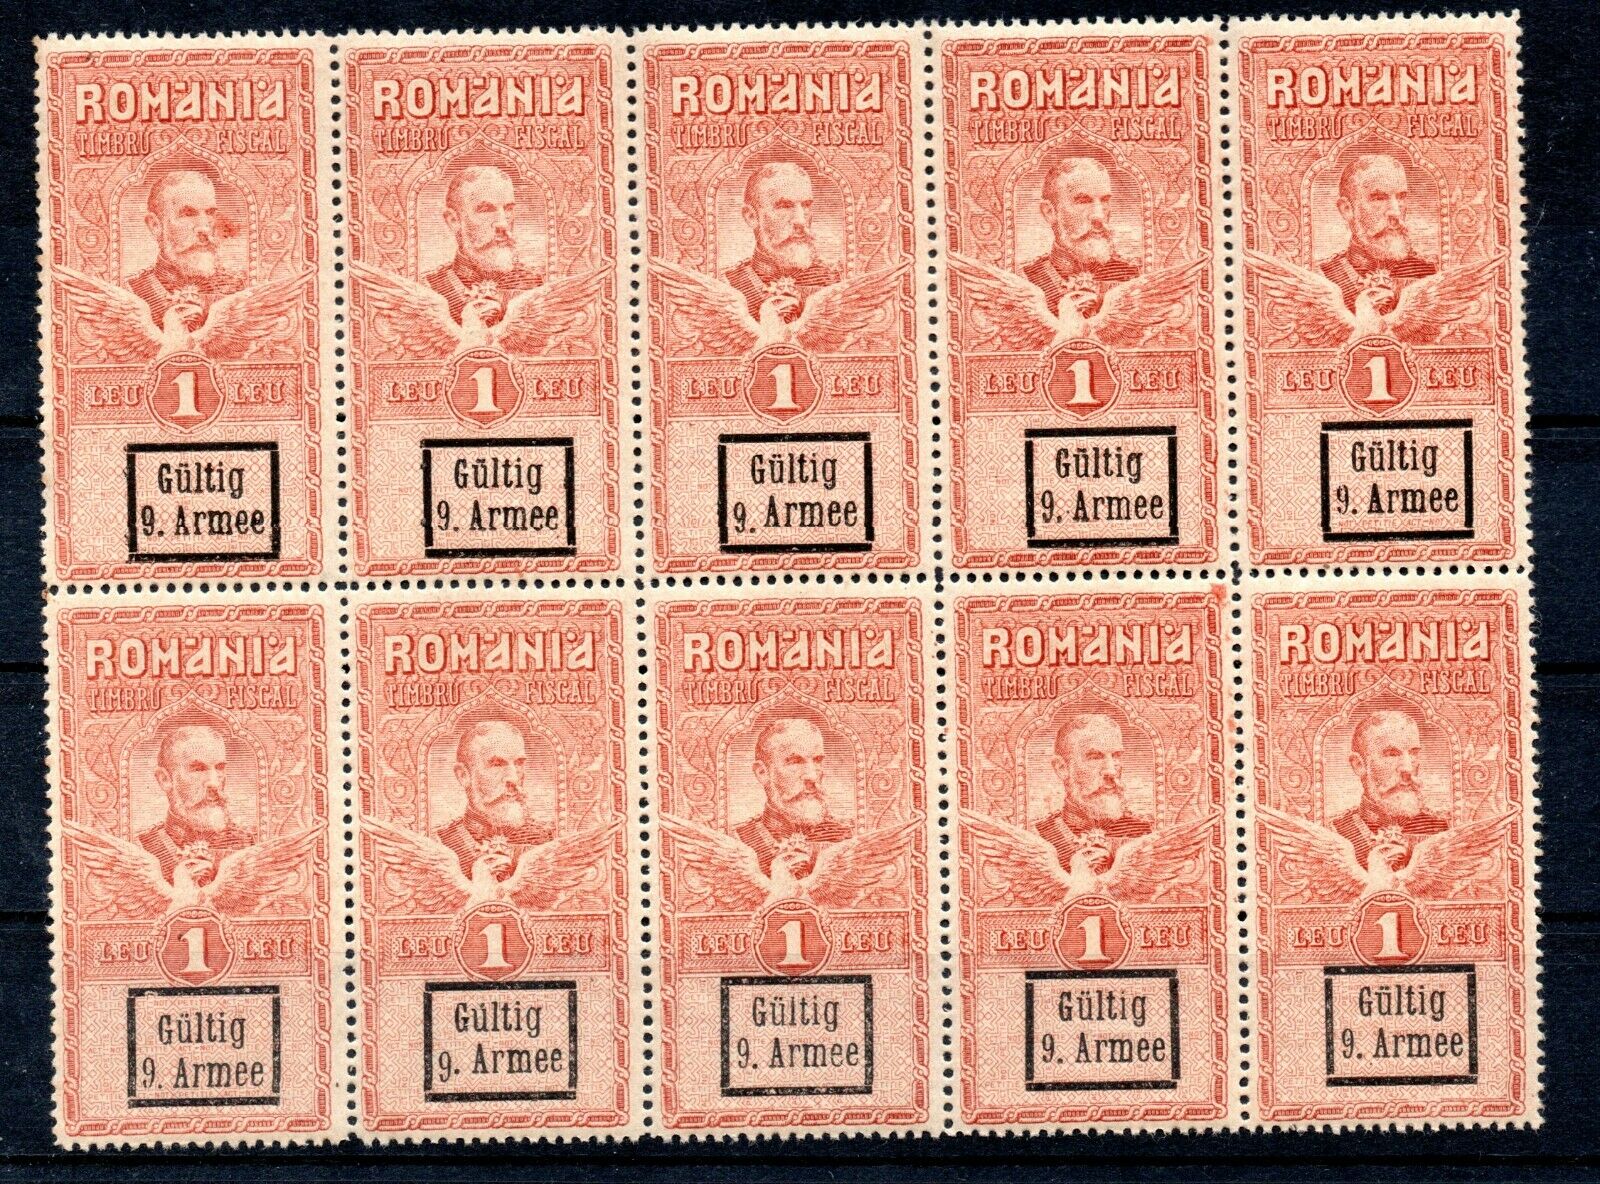 GERMANY  1918  ROMANIA REVENUES  OVERPRINTED 9 ARMY  Bl of TEN  MNH